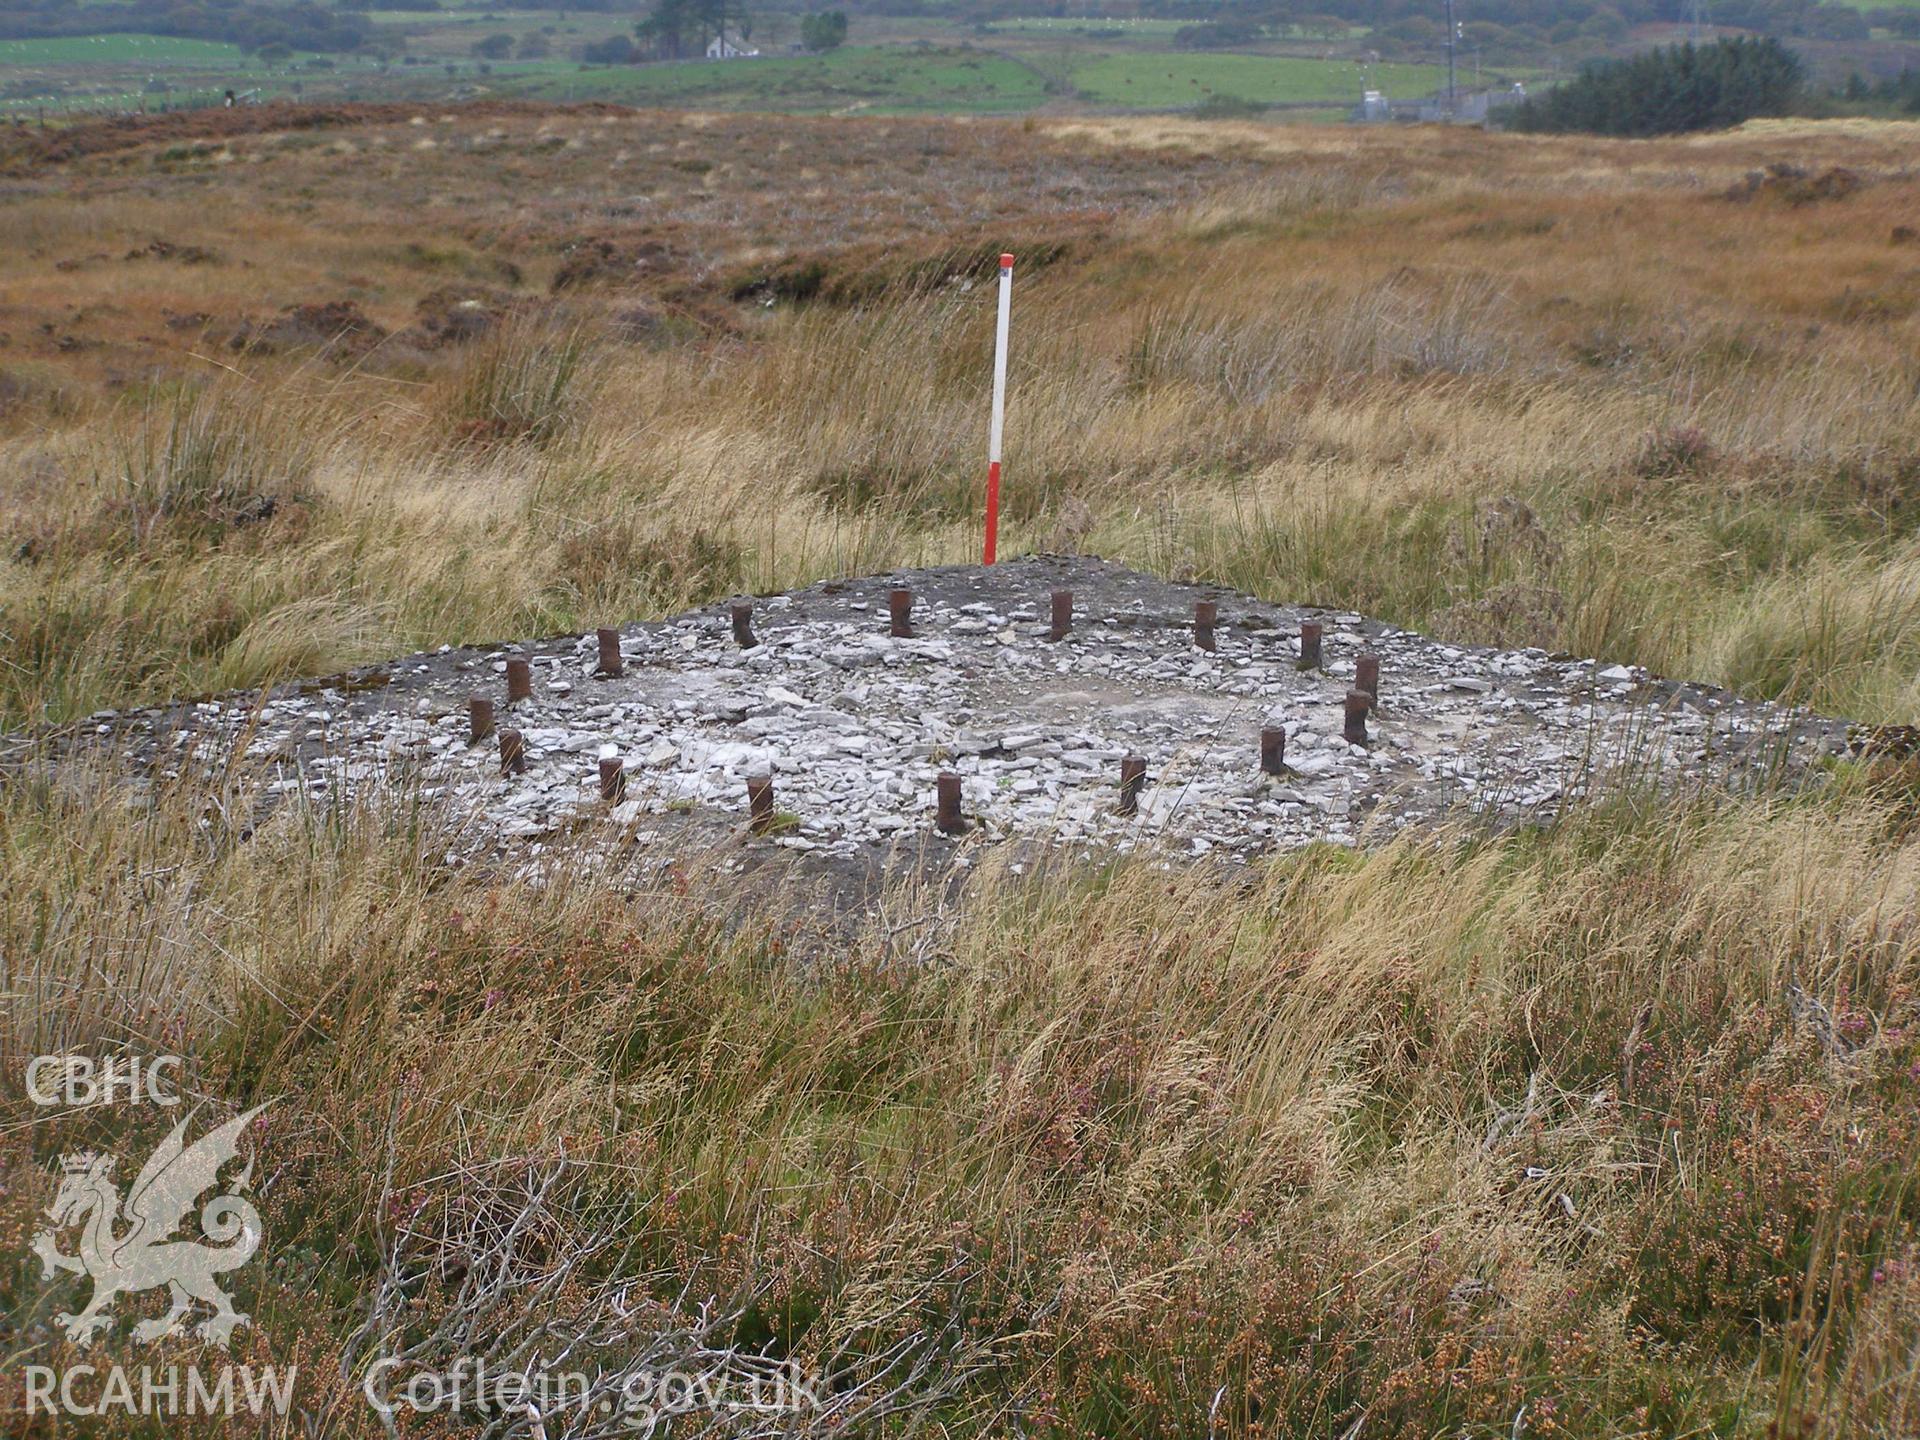 Digital colour photograph of Cefn Du Radio Station, concrete base XXV taken on 11/10/2007 by P.J. Schofield during the Snowdon North West Upland Survey undertaken by Oxford Archaeology North.